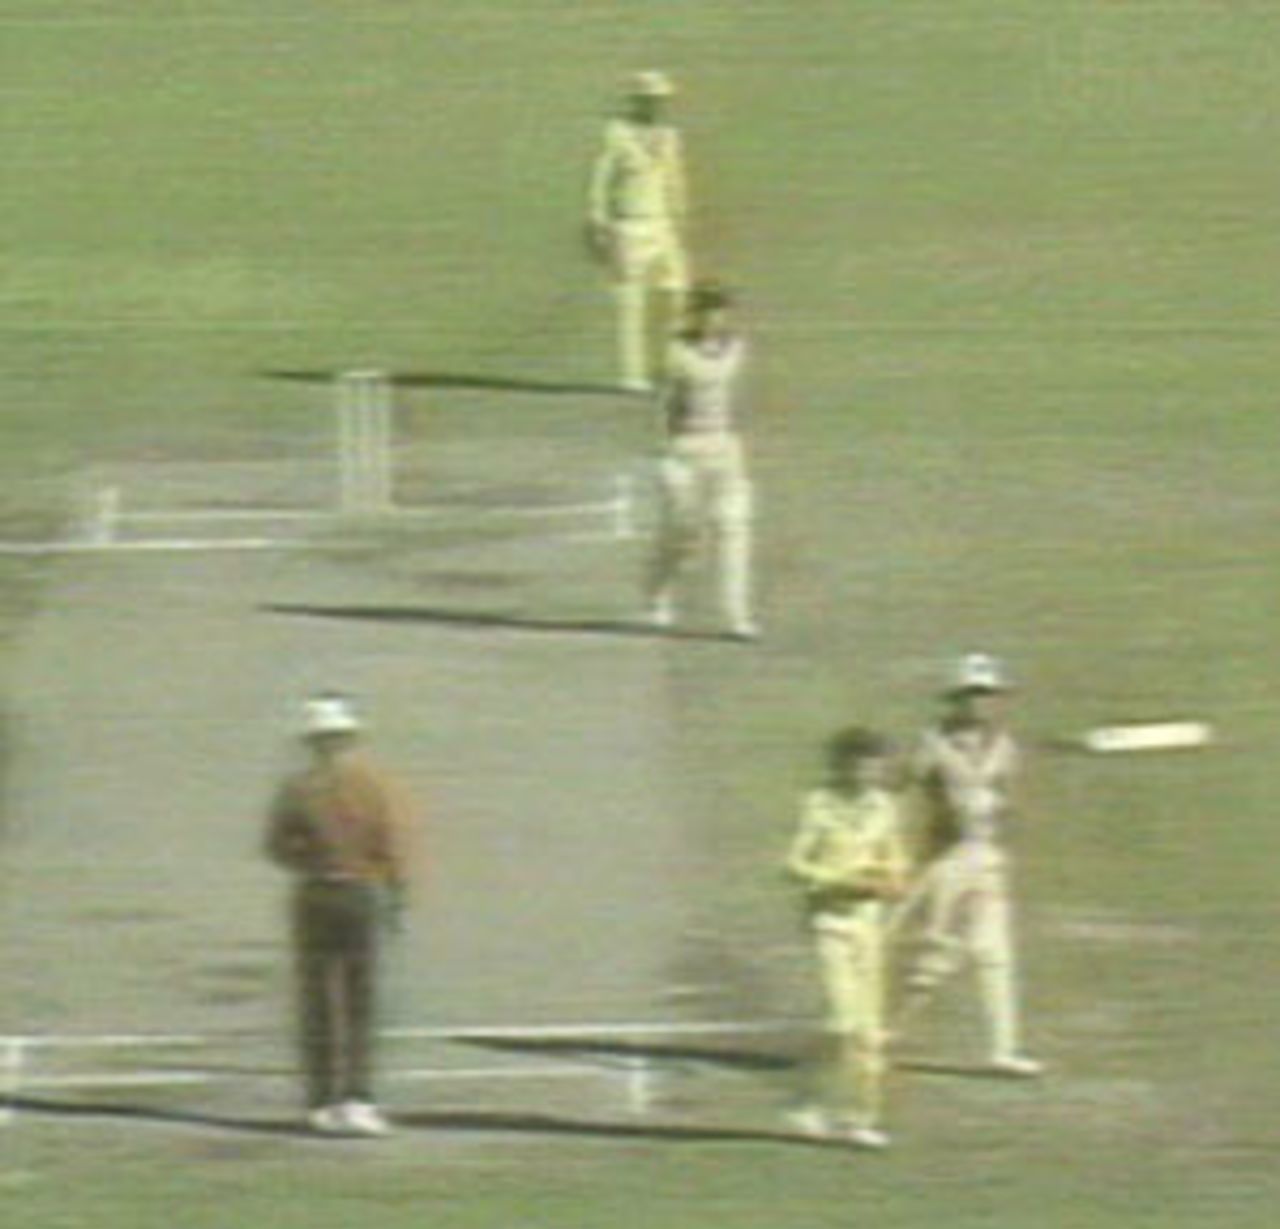 Trevor Chappell walks off after his infamous underarm delivery to Brian McKechnie , Australia v New Zealand, Melbourne, 1981